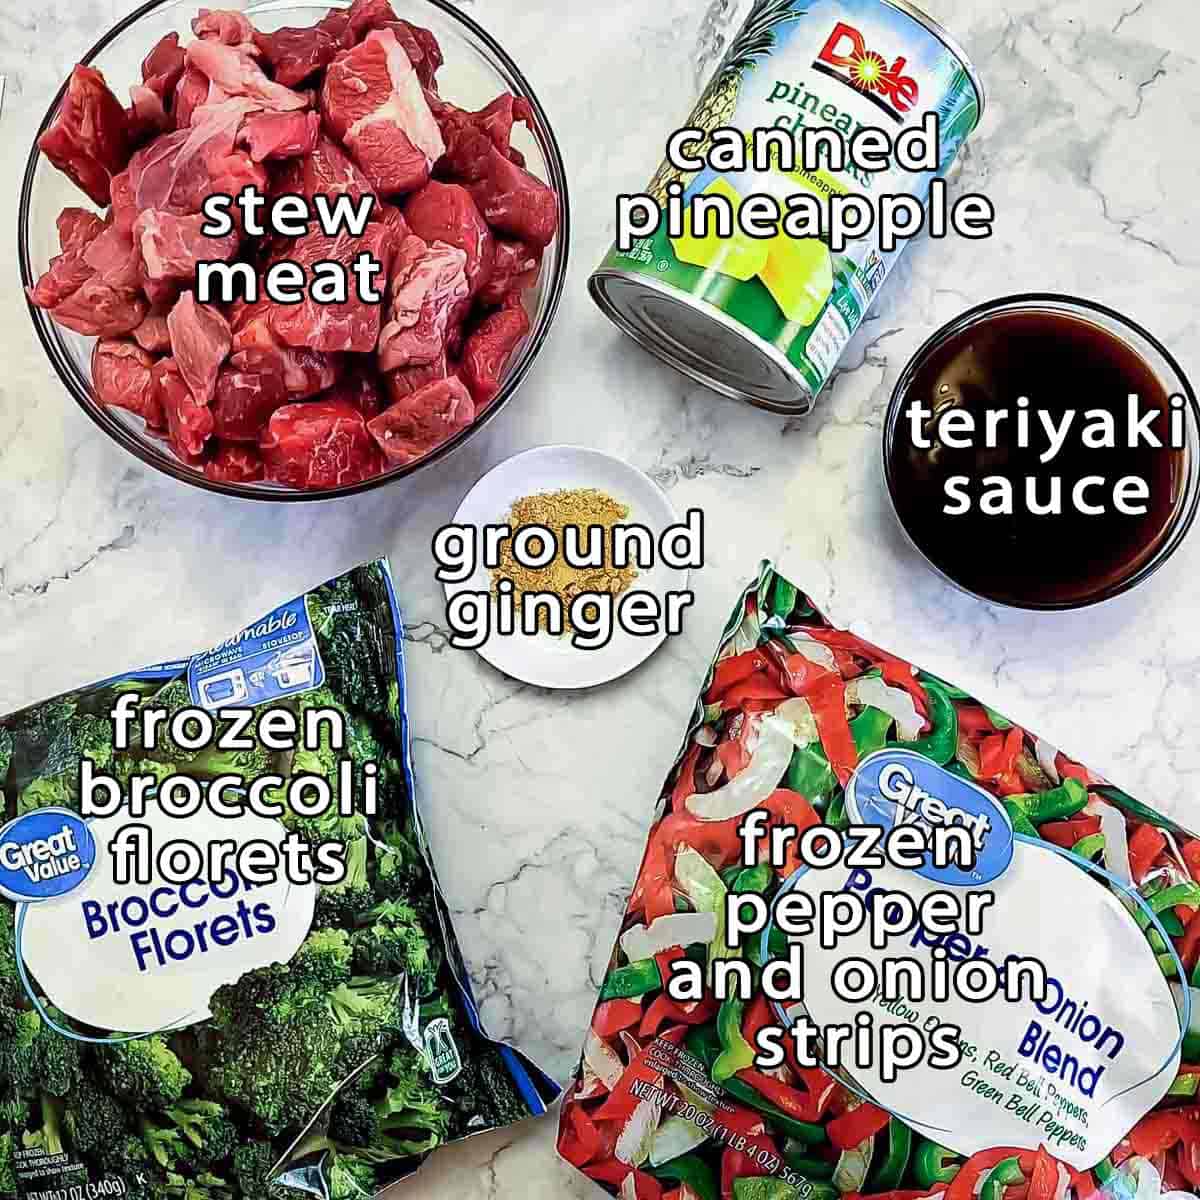 Overhead shot of ingredients - stew meat, canned pineapple, frozen broccoli florets, frozen pepper and onion strips, teriyaki sauce, and ground ginger.